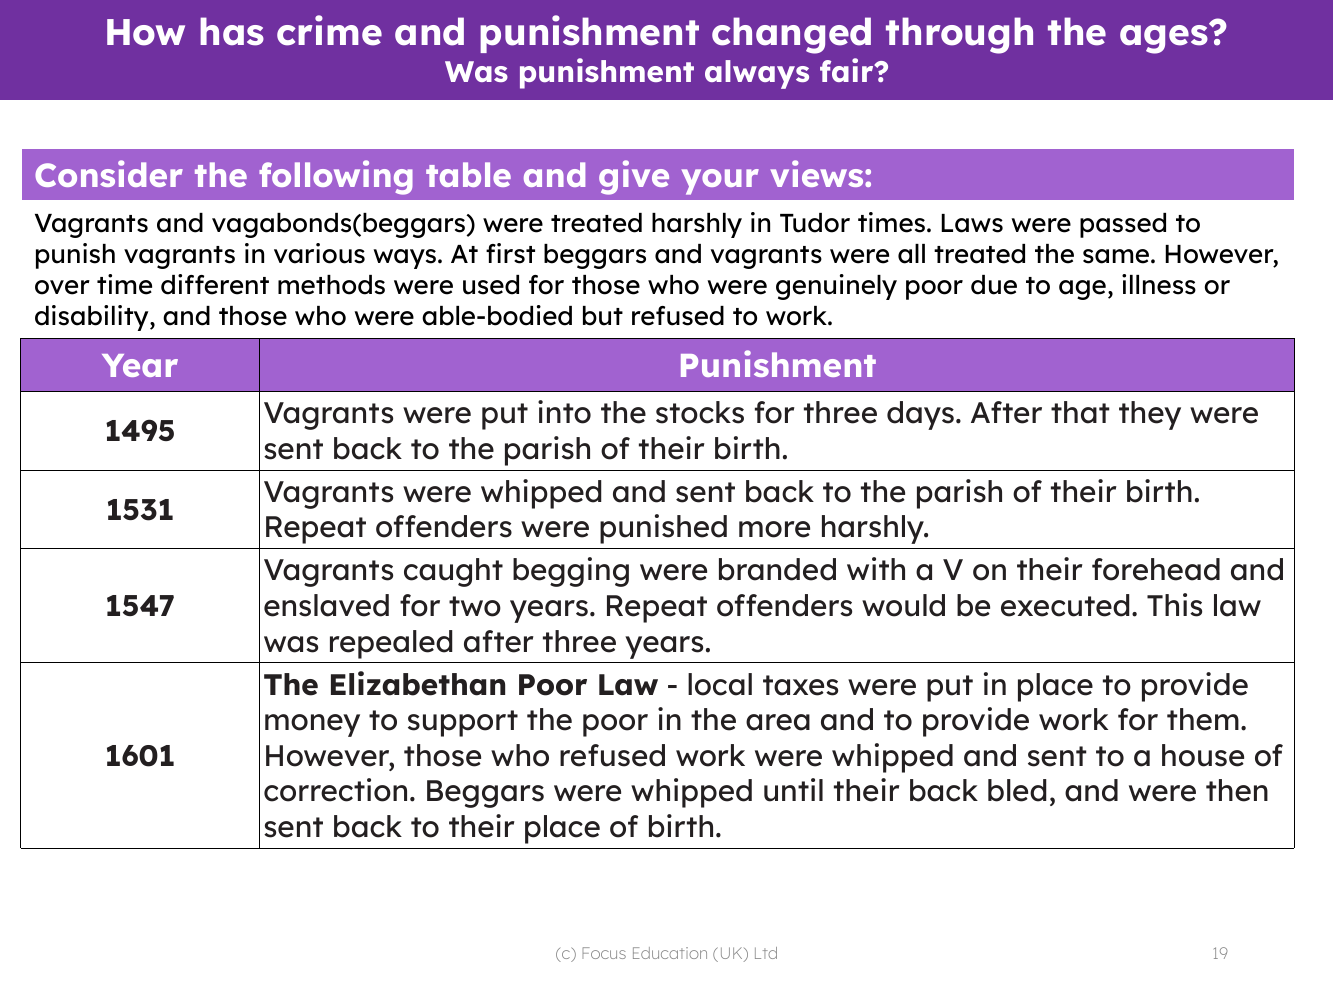 Punishments for vagrants in Tudor times - Info sheet